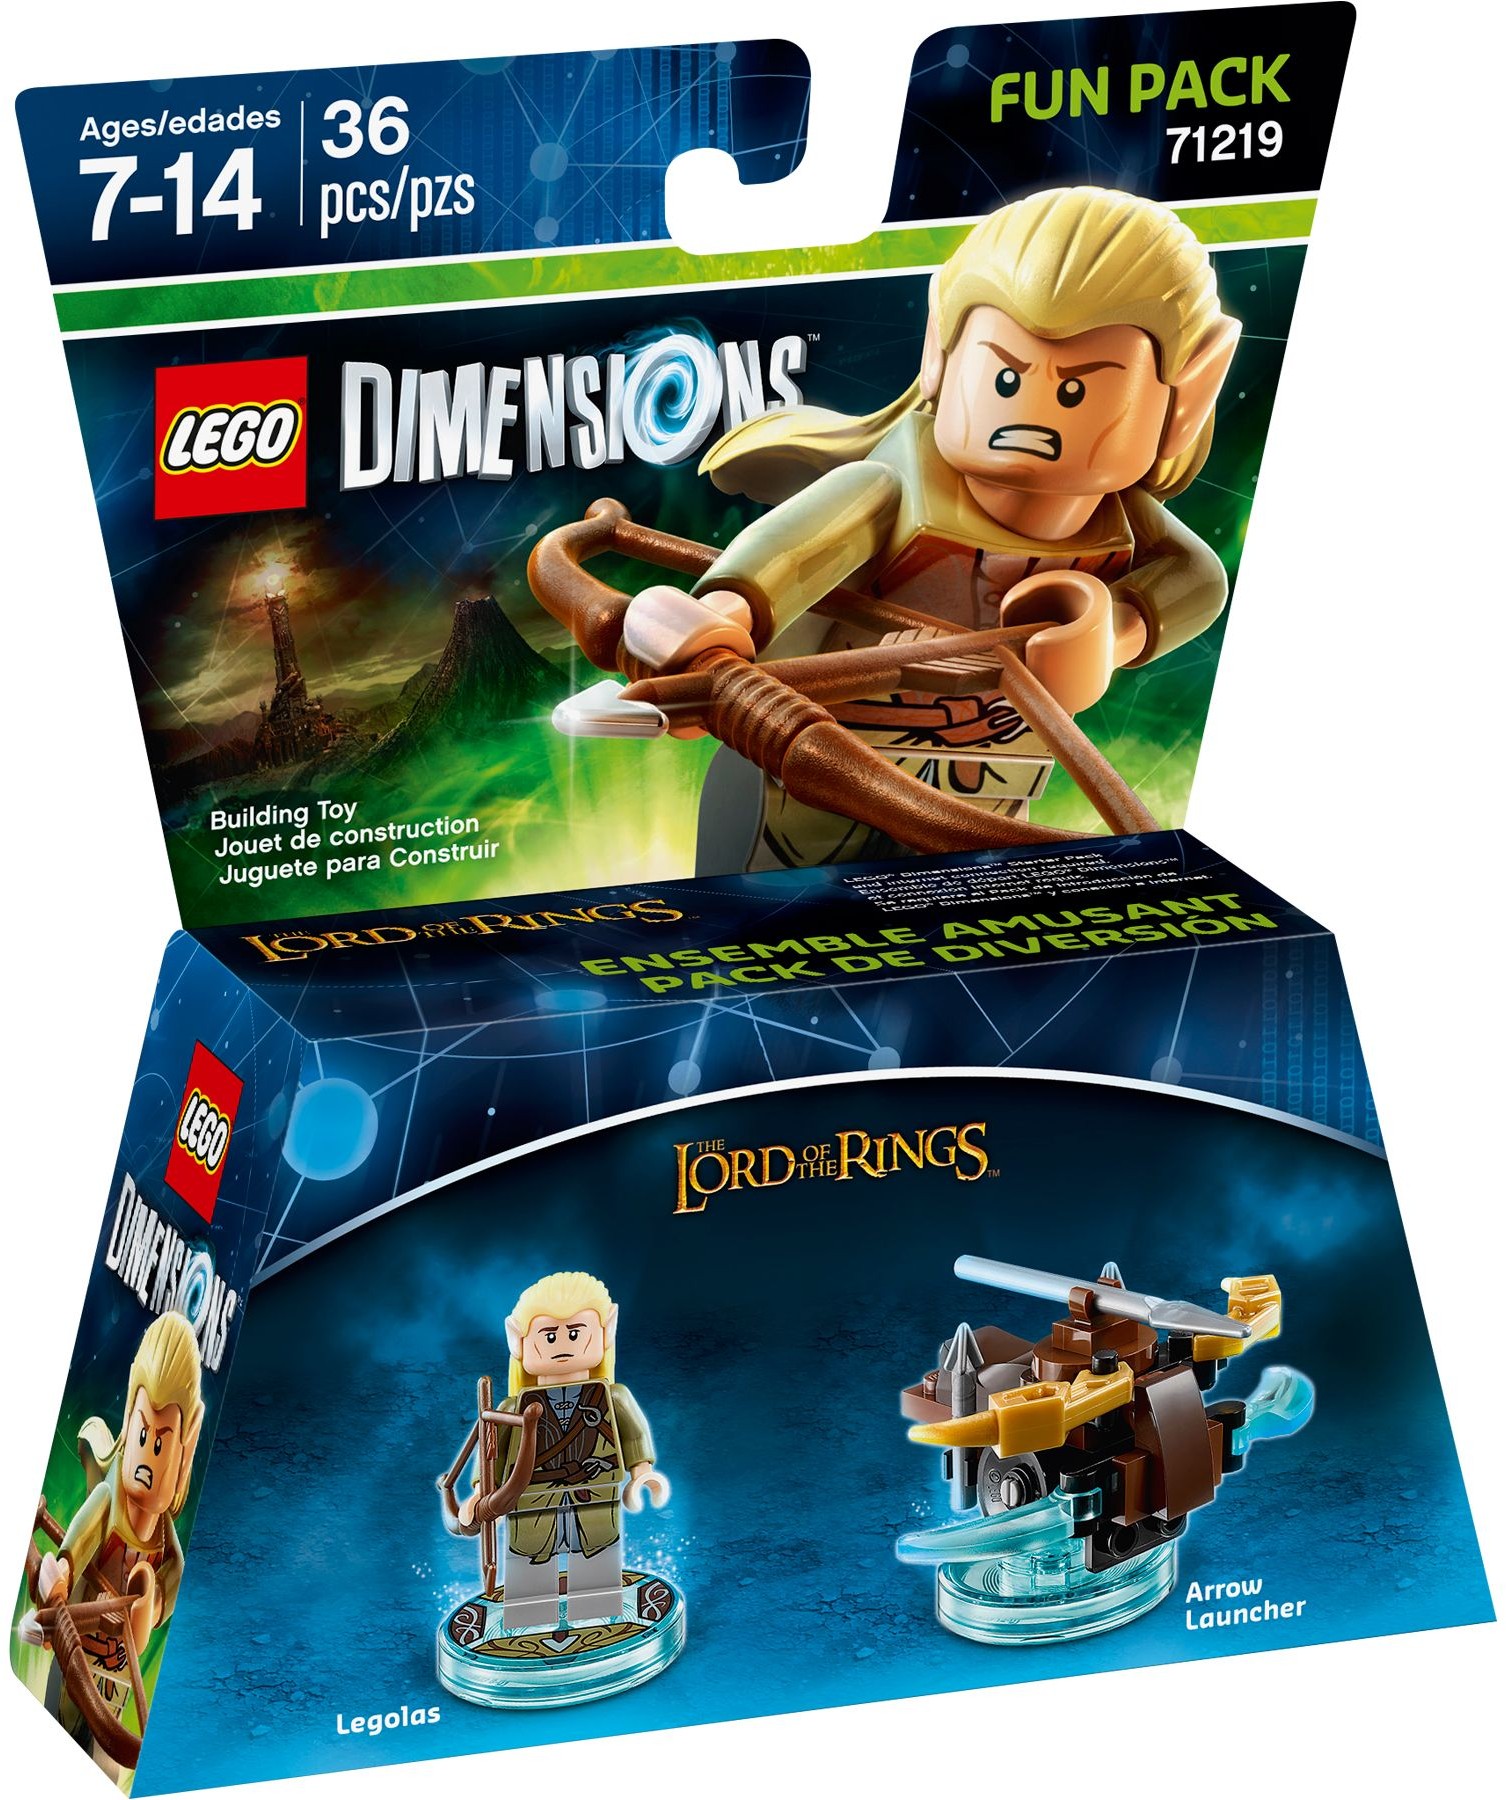 71219 LEGO® Dimensions The Lord of the Rings™ Legolas Fun Pack